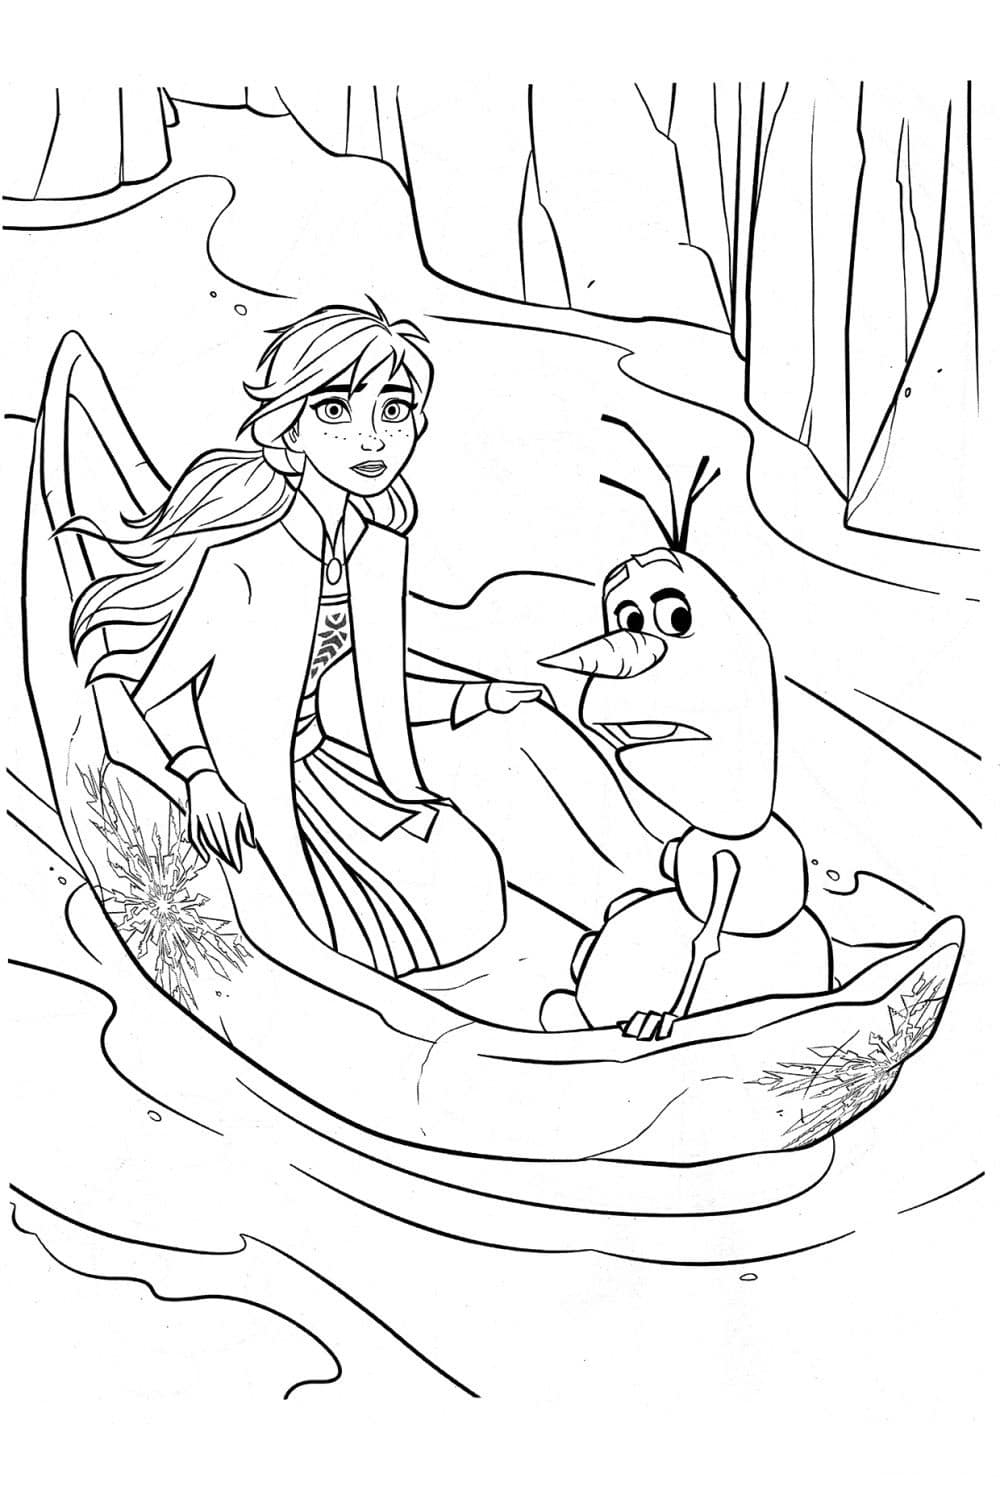 Anna and Olaf in a boat